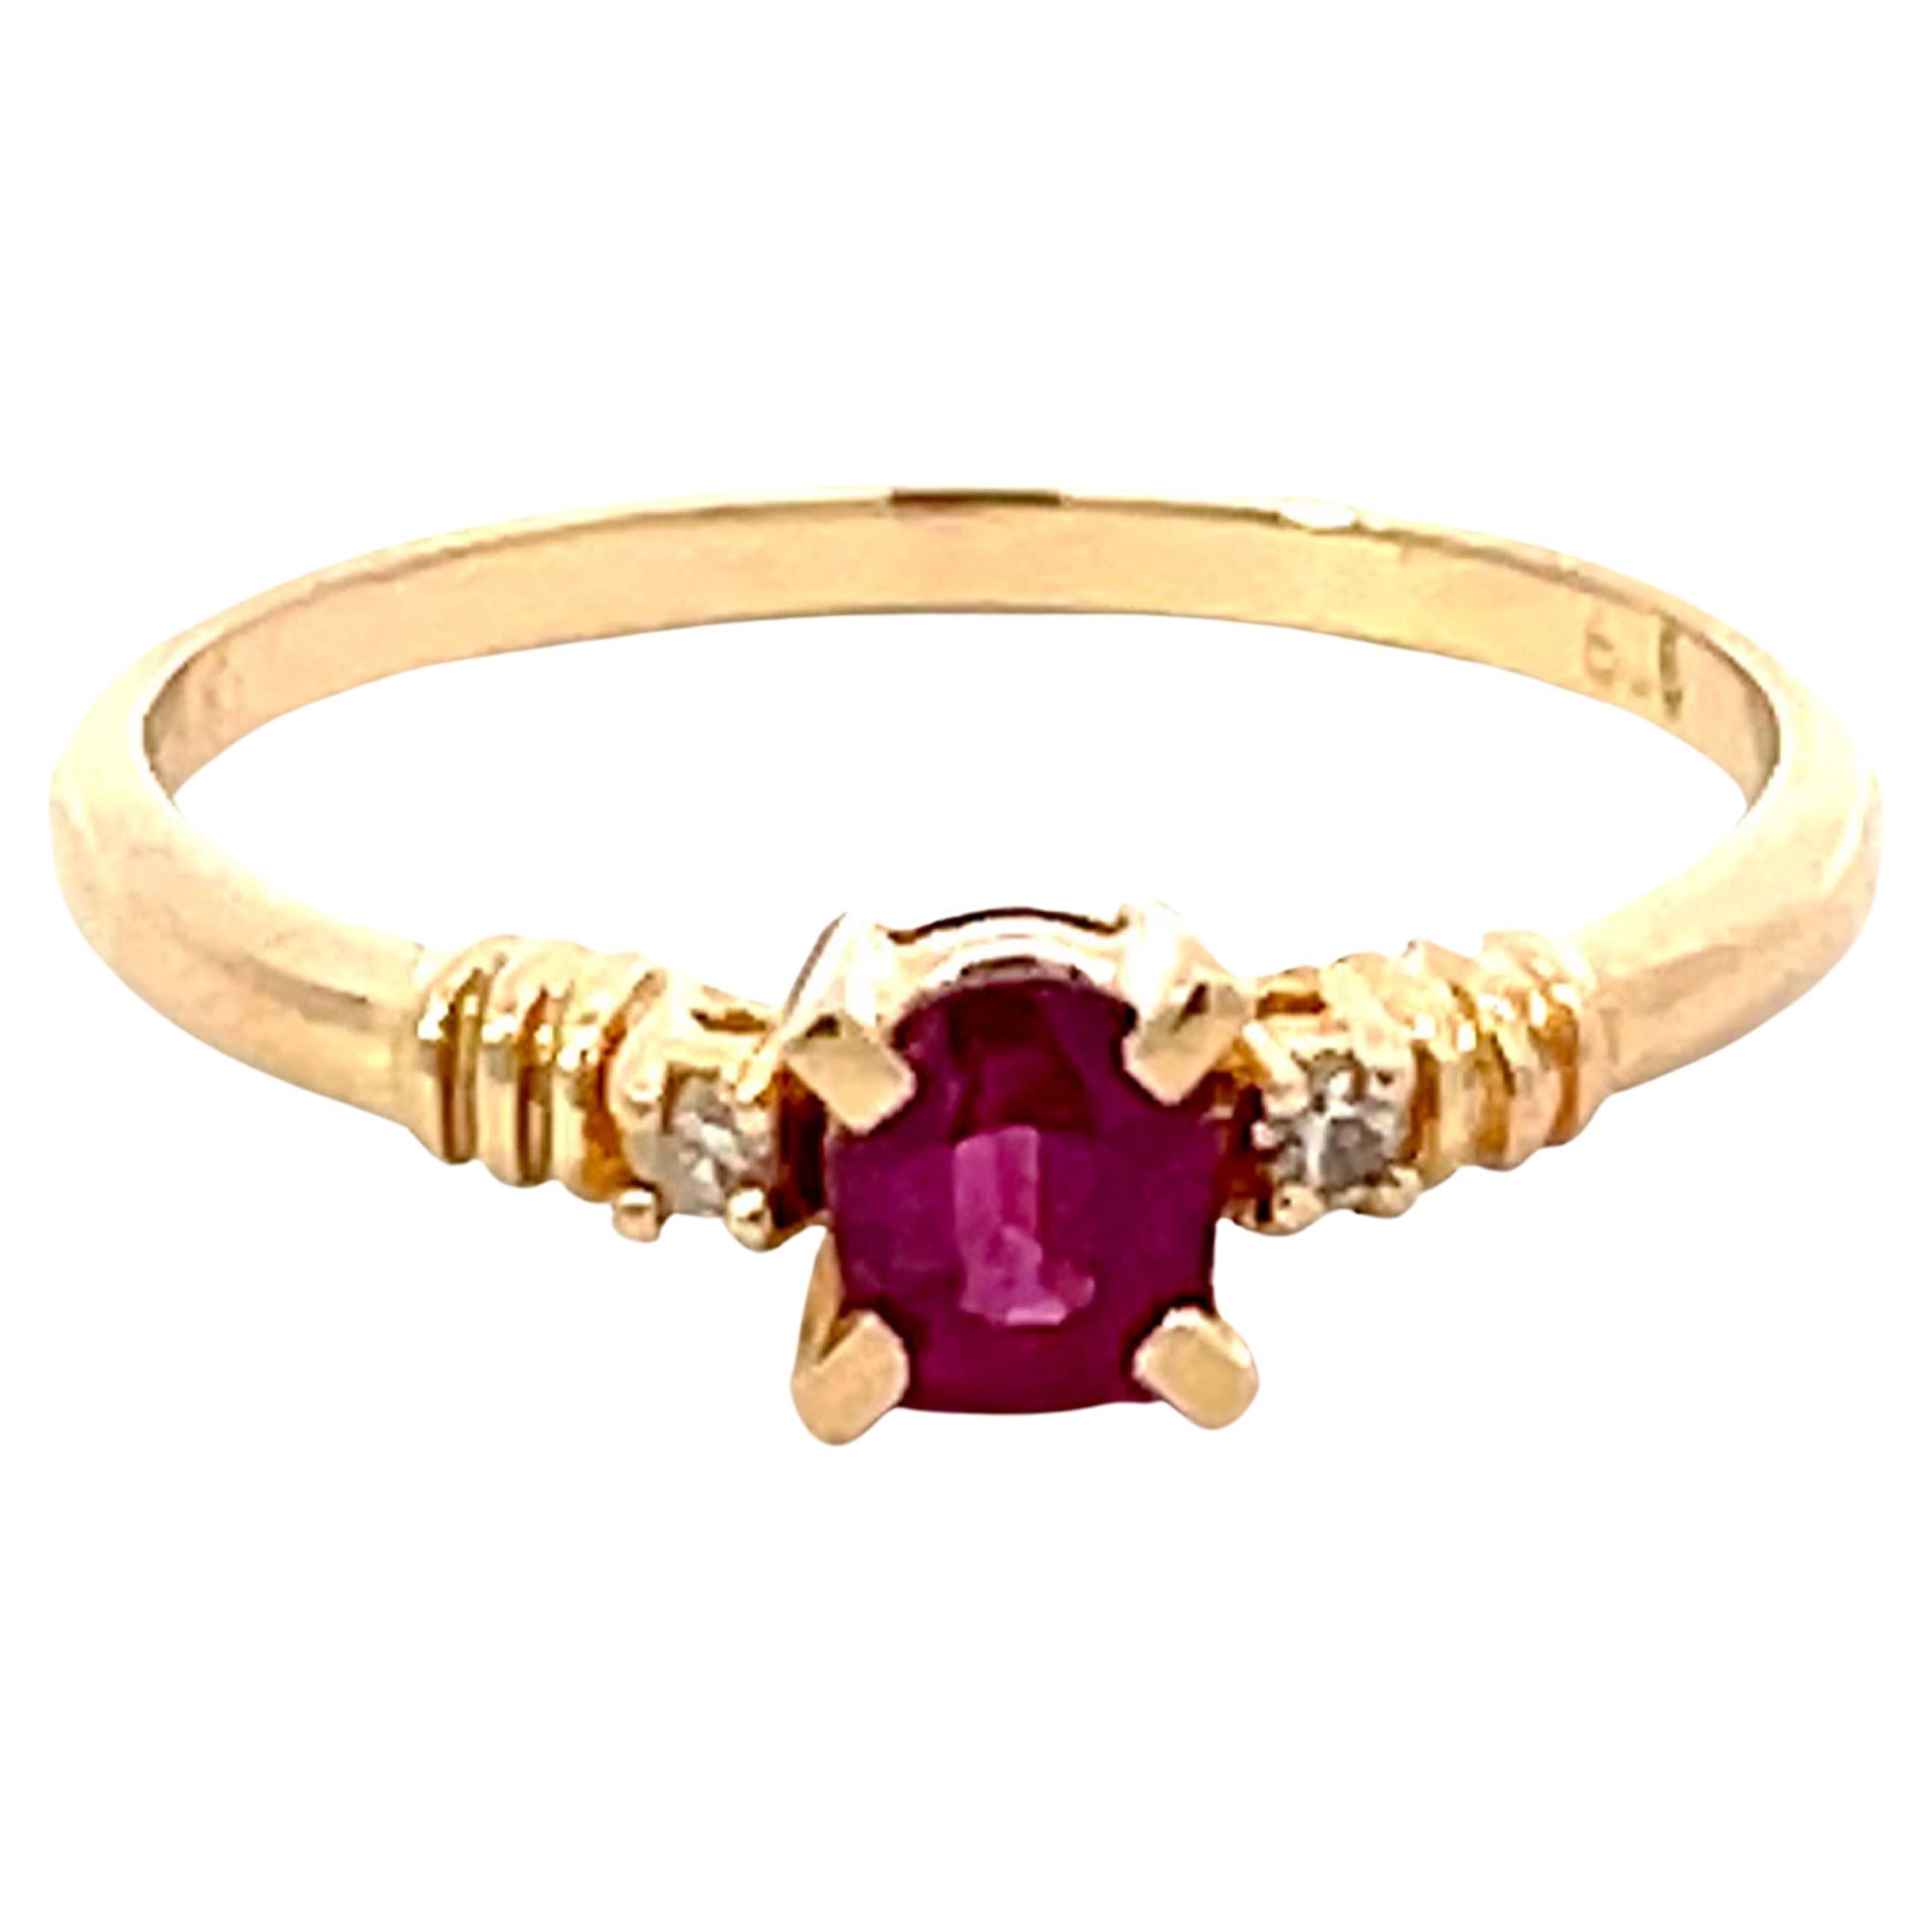 Oval Ruby Diamond Ring in 14k Yellow Gold